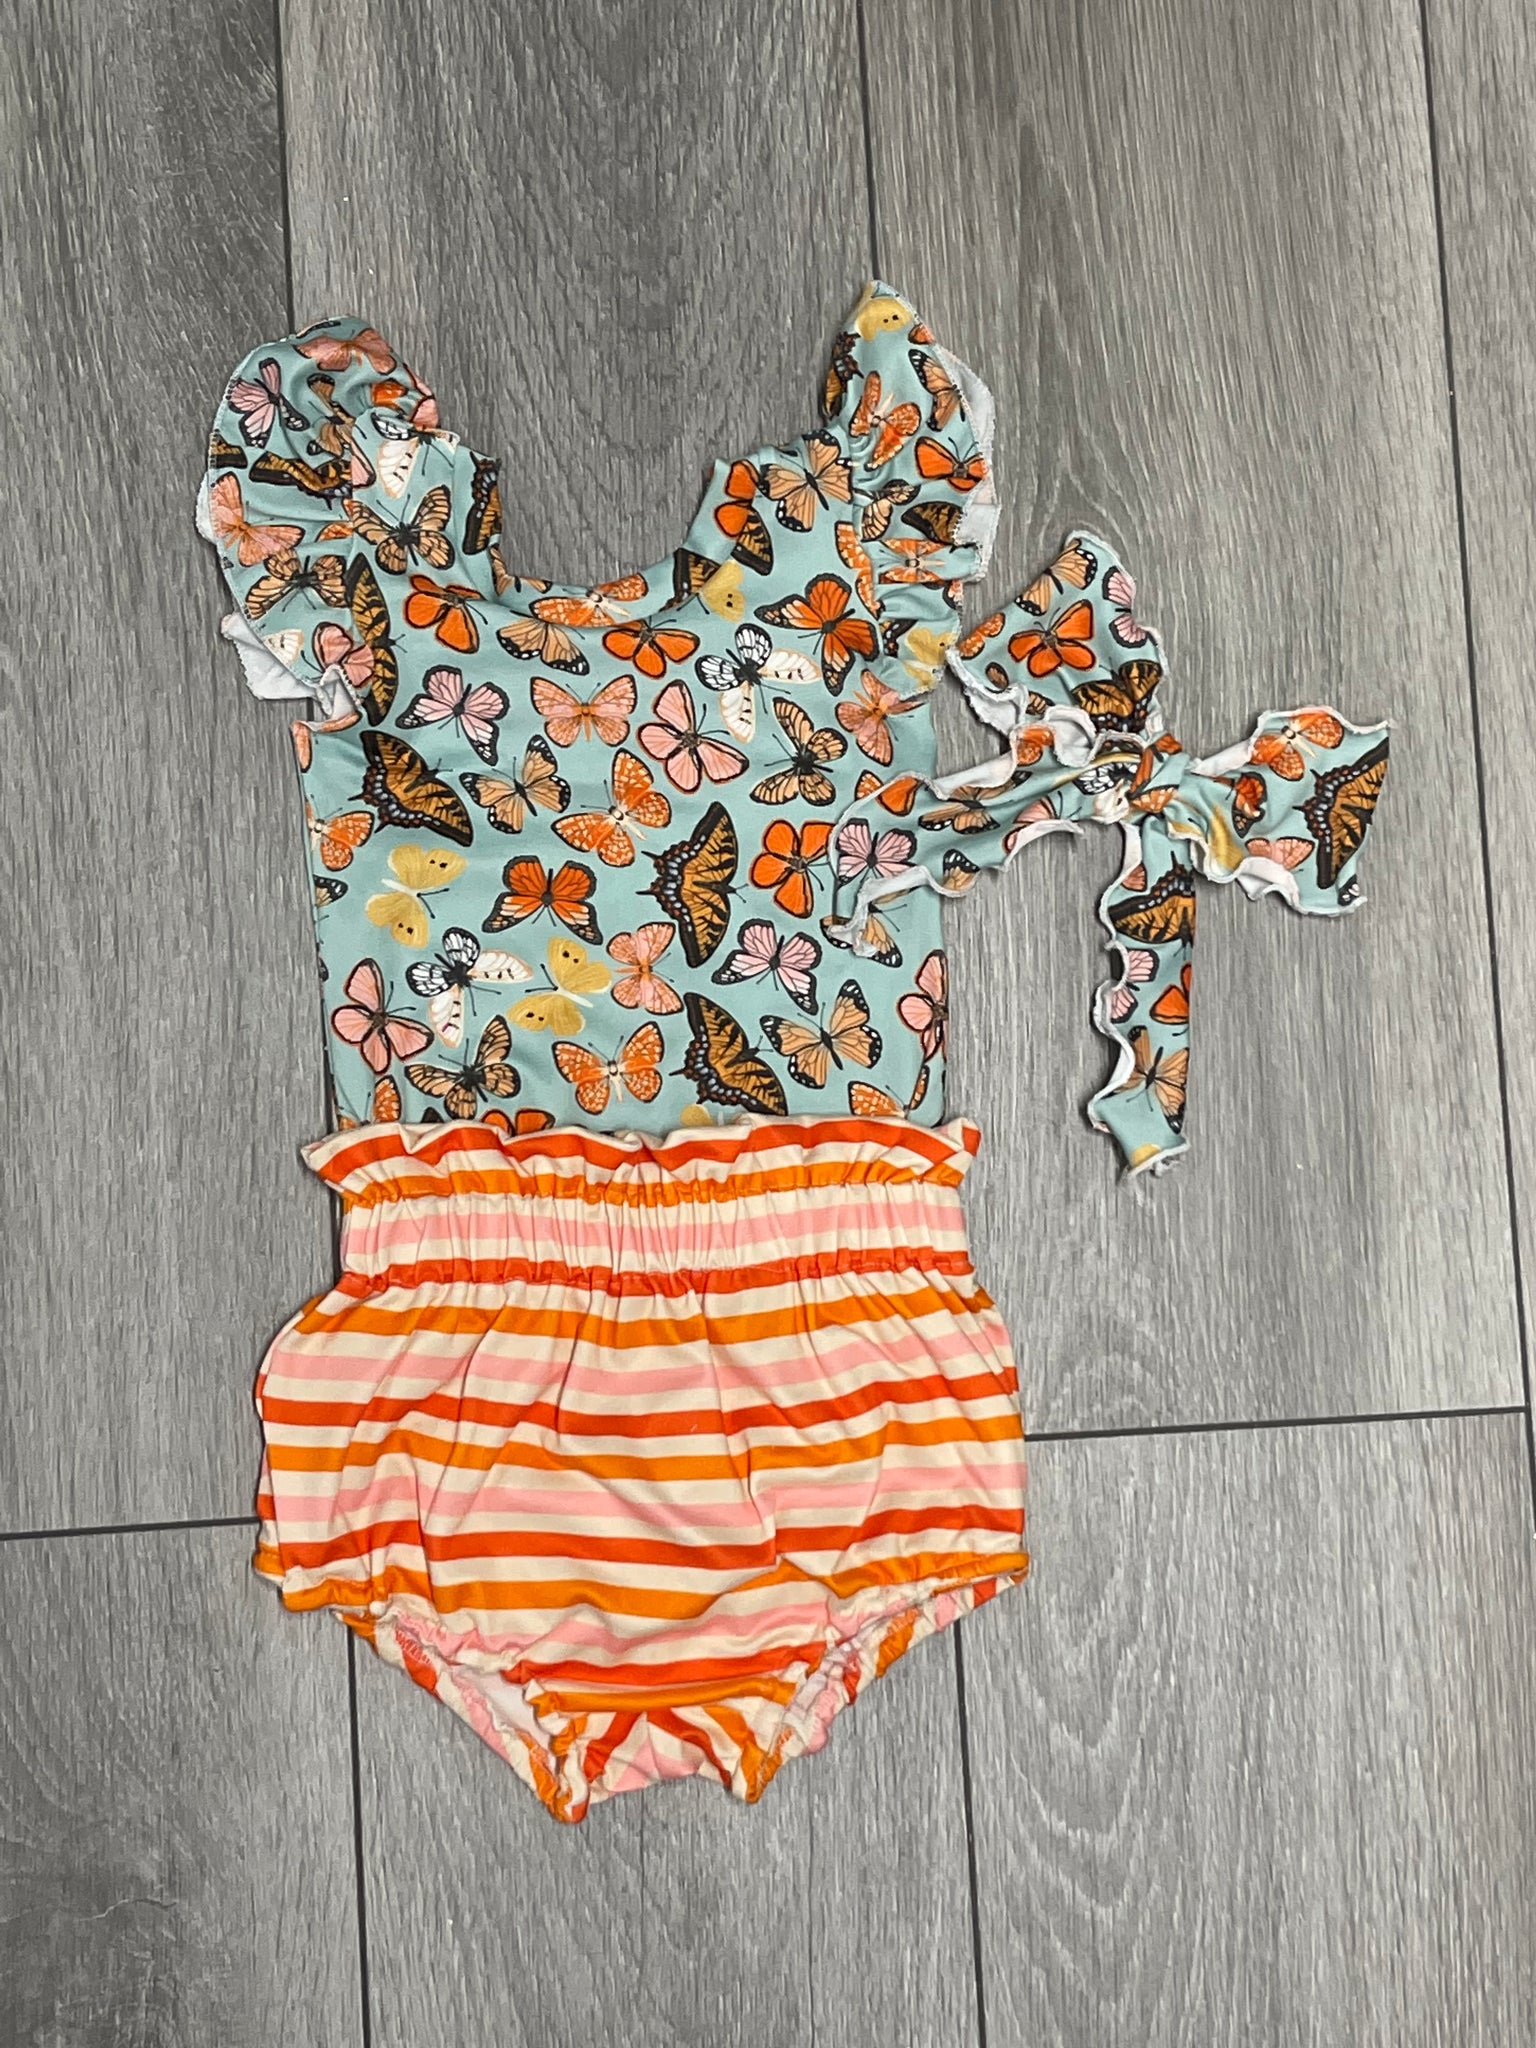 Groovy Butterfly Print with Coordinate (several clothing options)